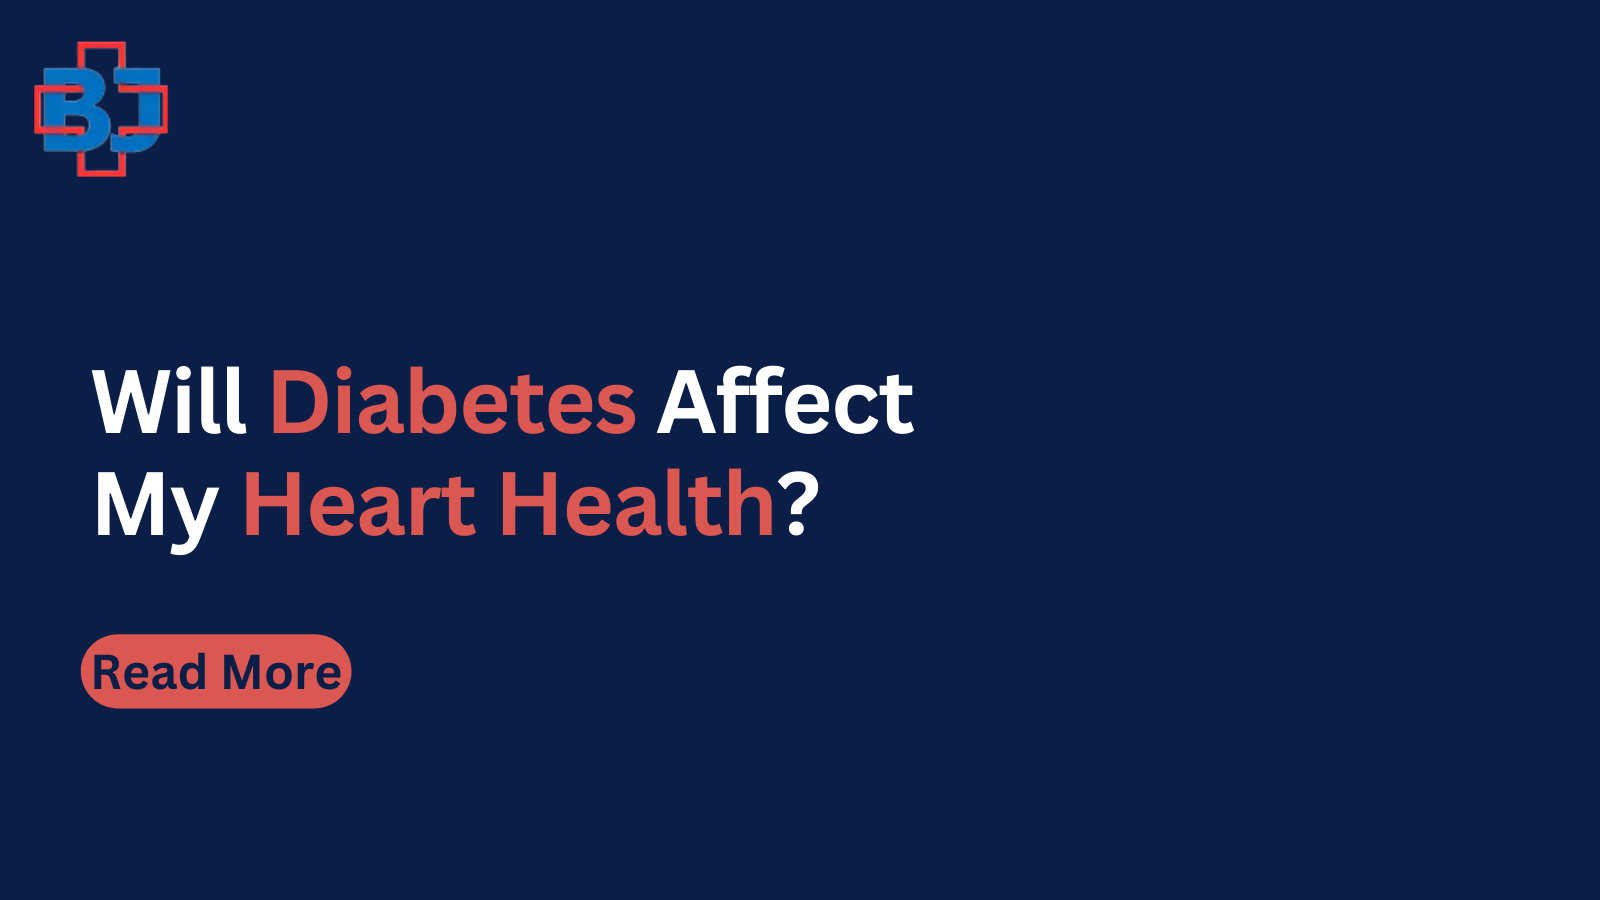 Does diabetes cause heart problems